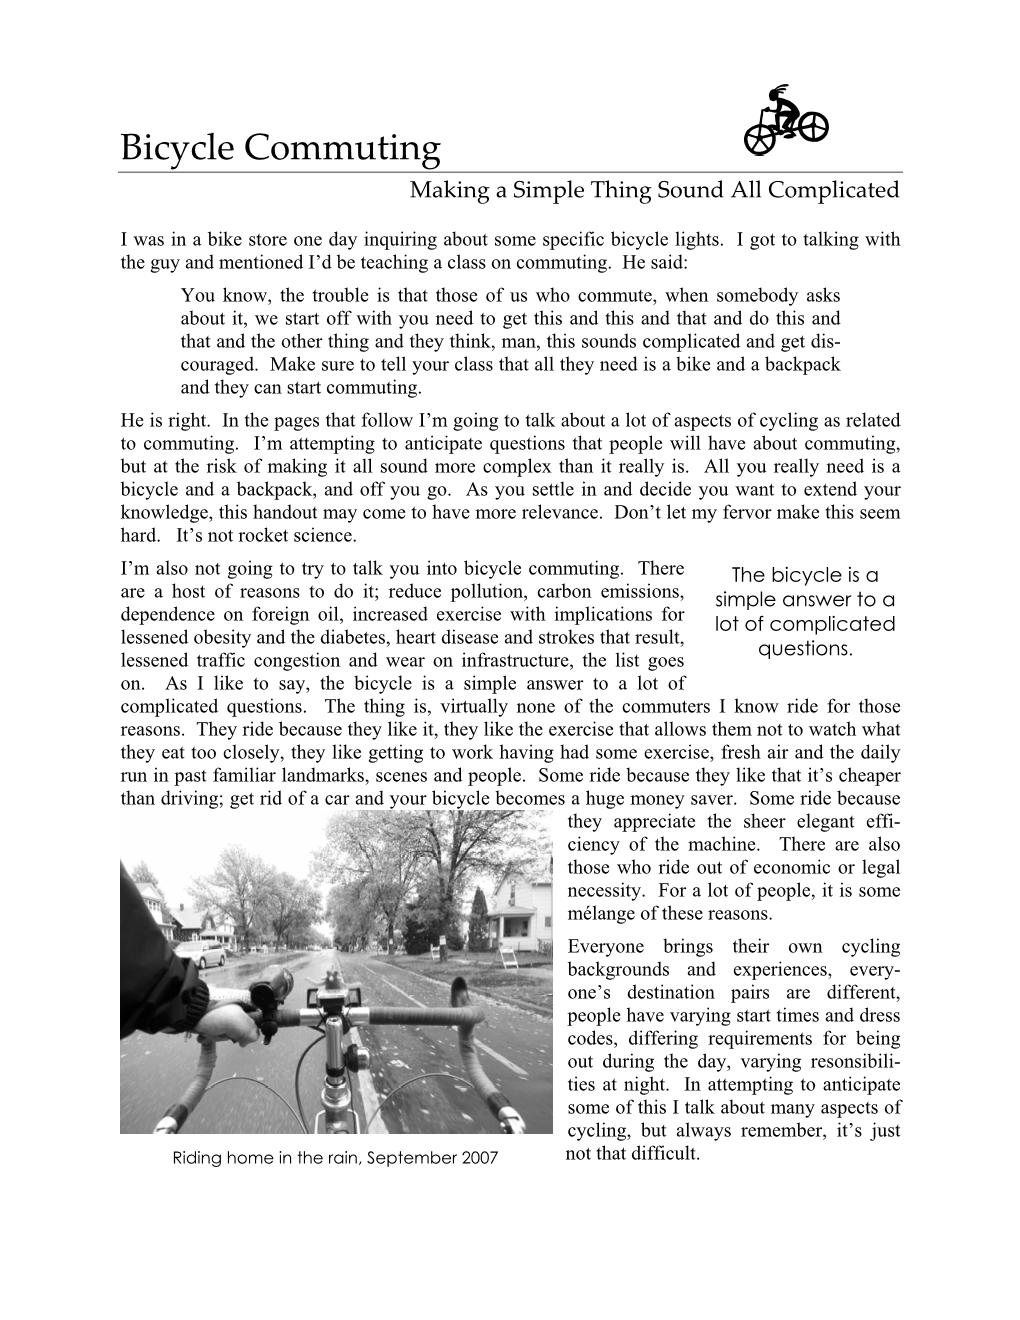 Bicycle Commuting Handout